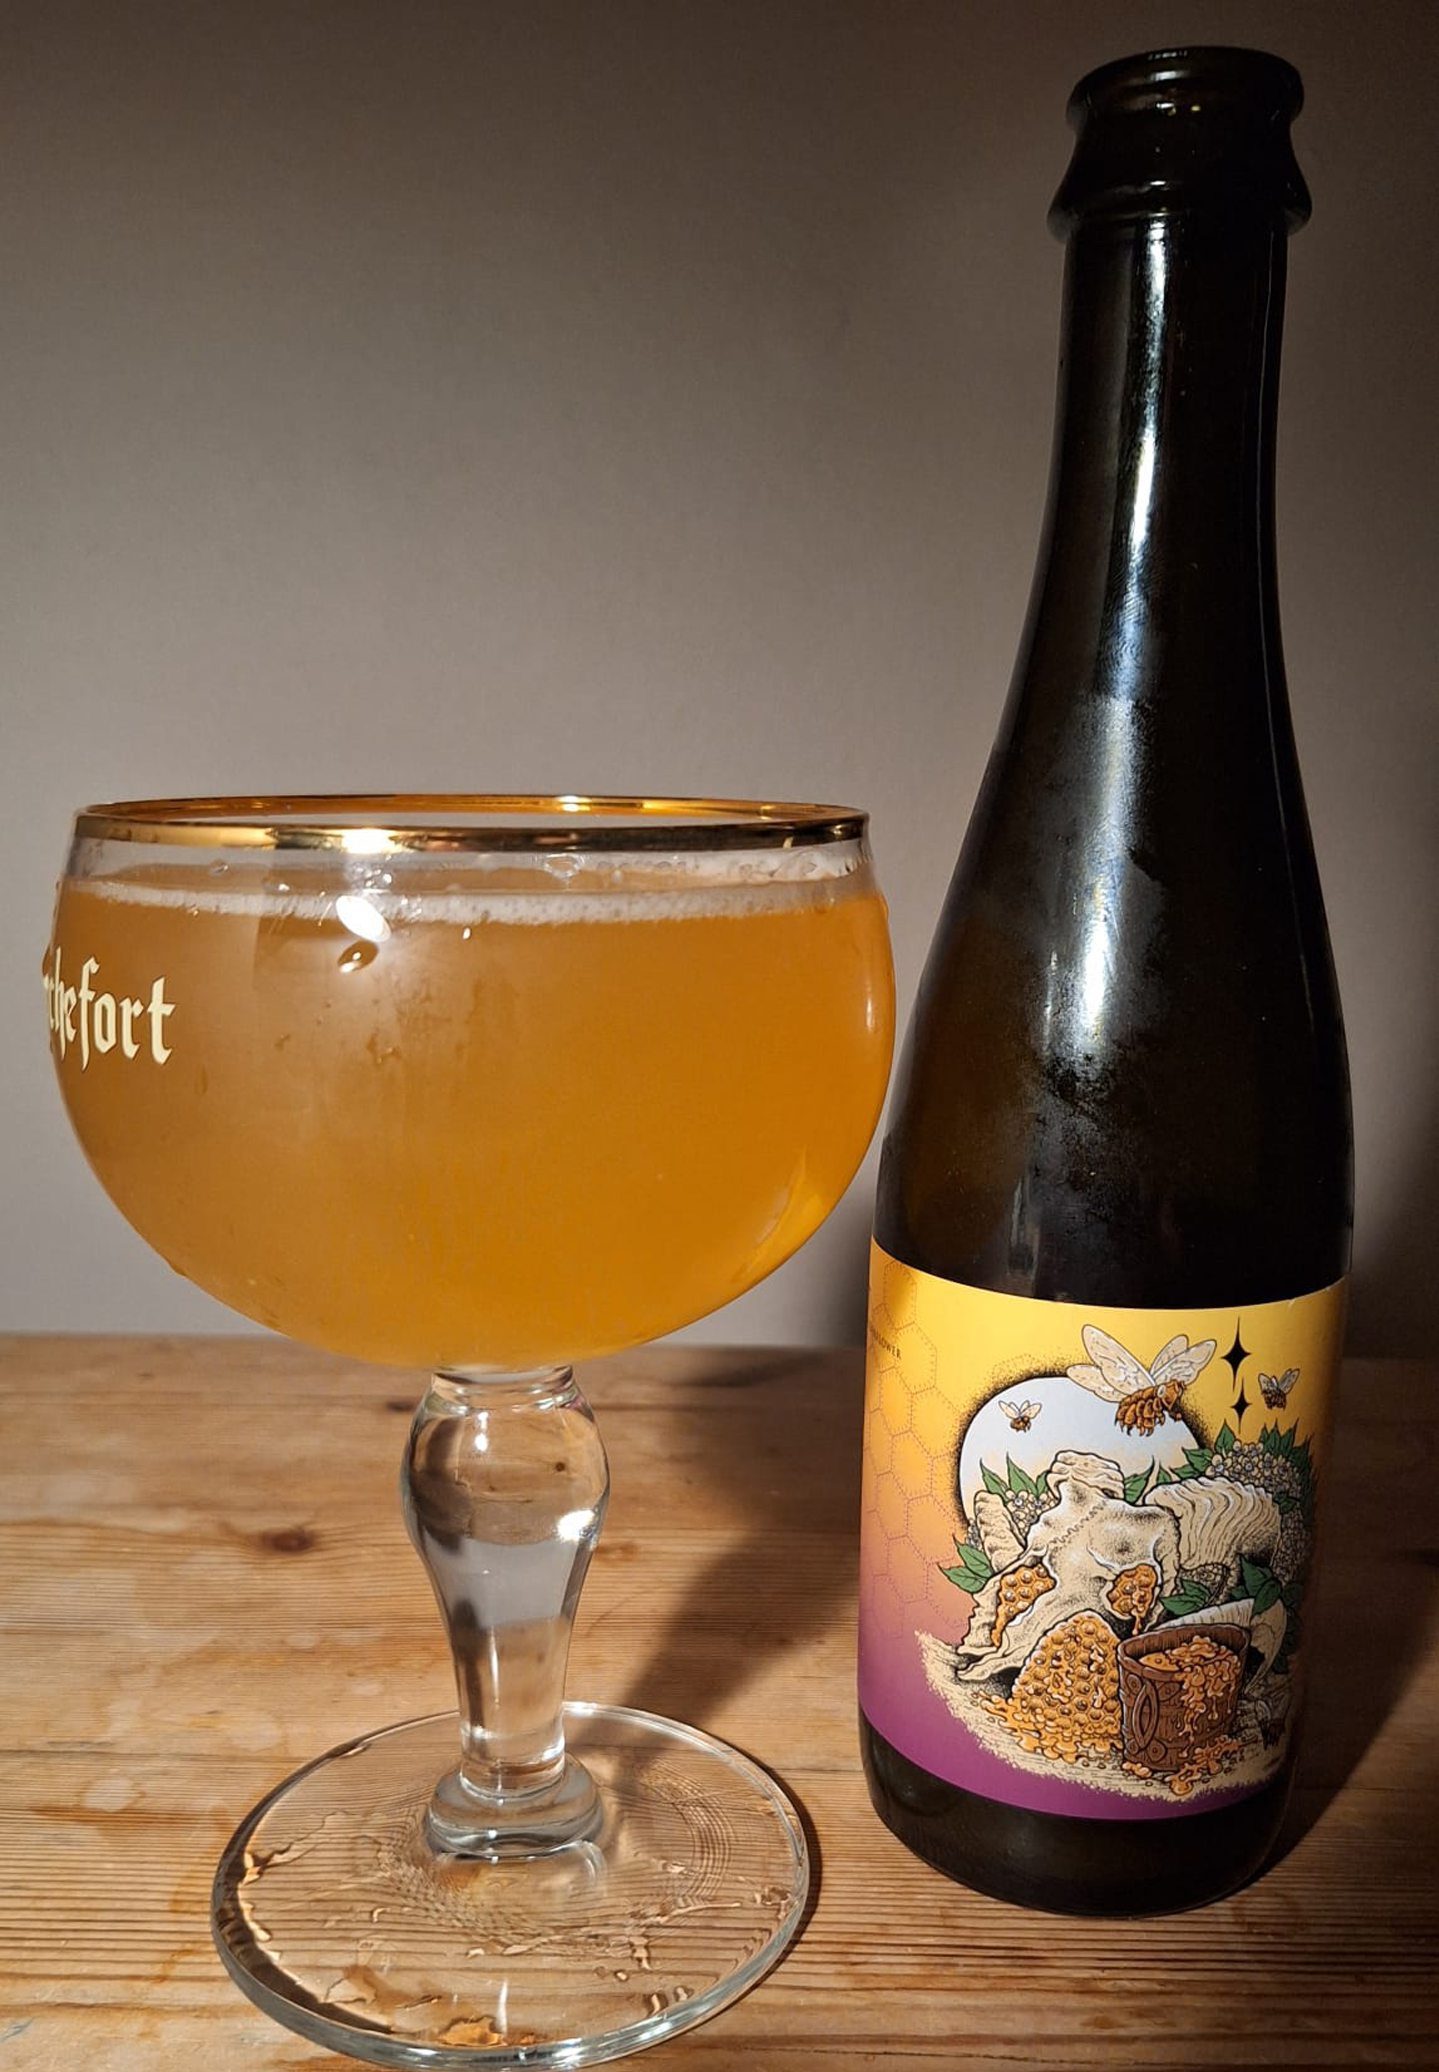 The Heather Honeybucket beer from Holy Goat poured into a glass. 